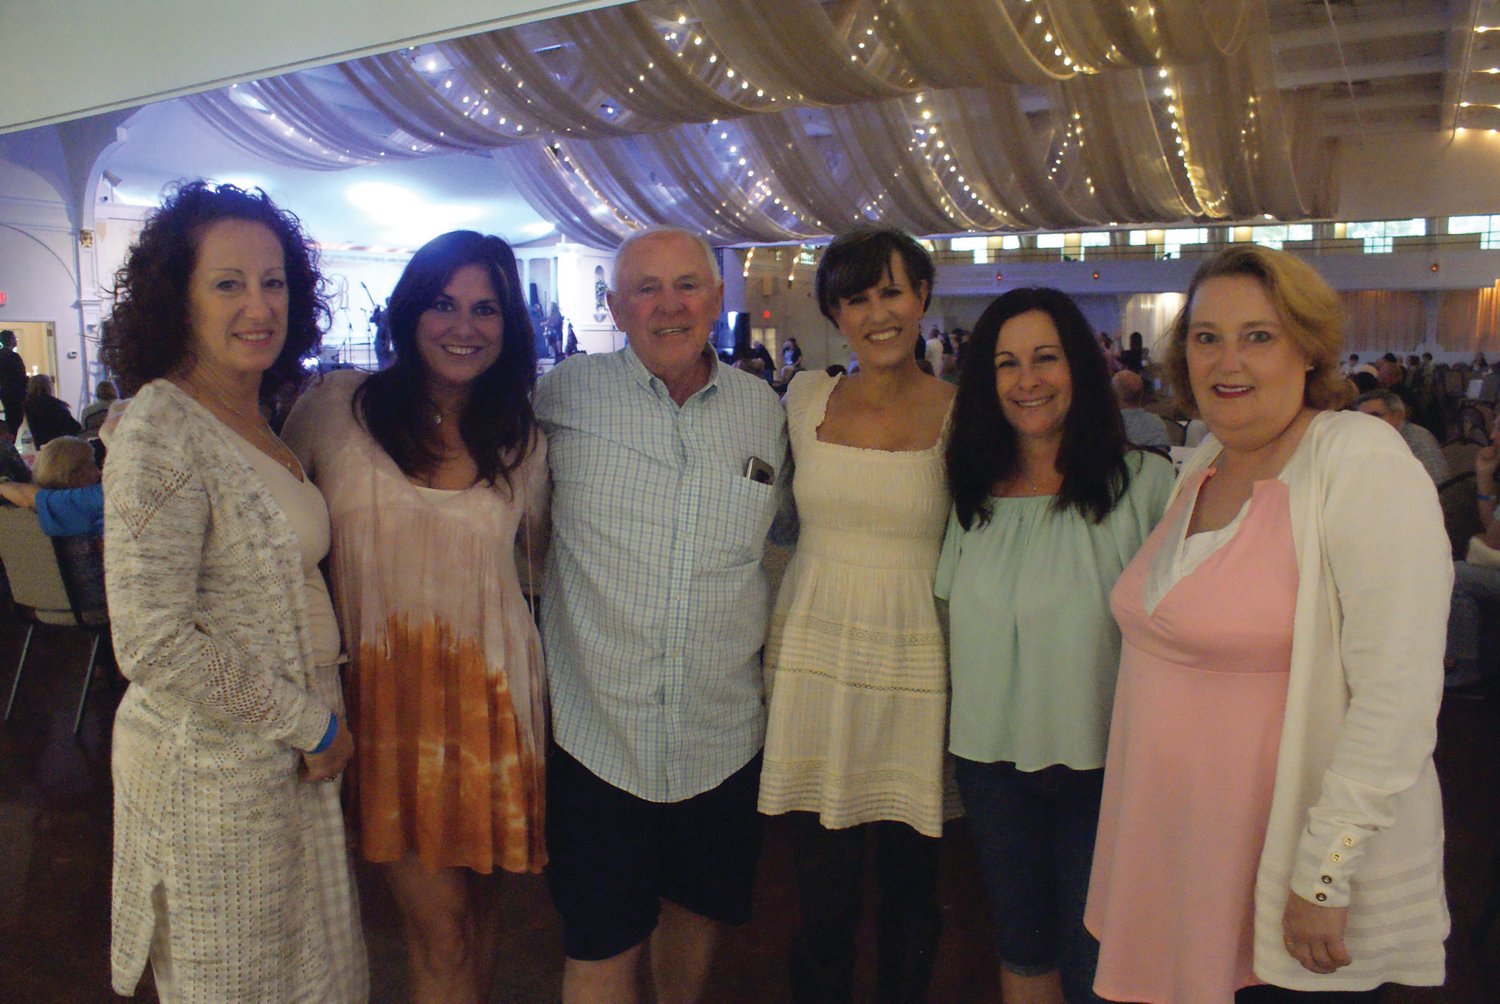 GIRLS’ NIGHT OUT: Several friends got together Sunday for Rock & Rhodes Music Festival at Rhodes on the Pawtuxet. Pictured with event co-producer Brian Dupont are Theresa Martino, Pat Paolino Cruz, Leslie Palumbo, Robin Taft and Kathi Disney.